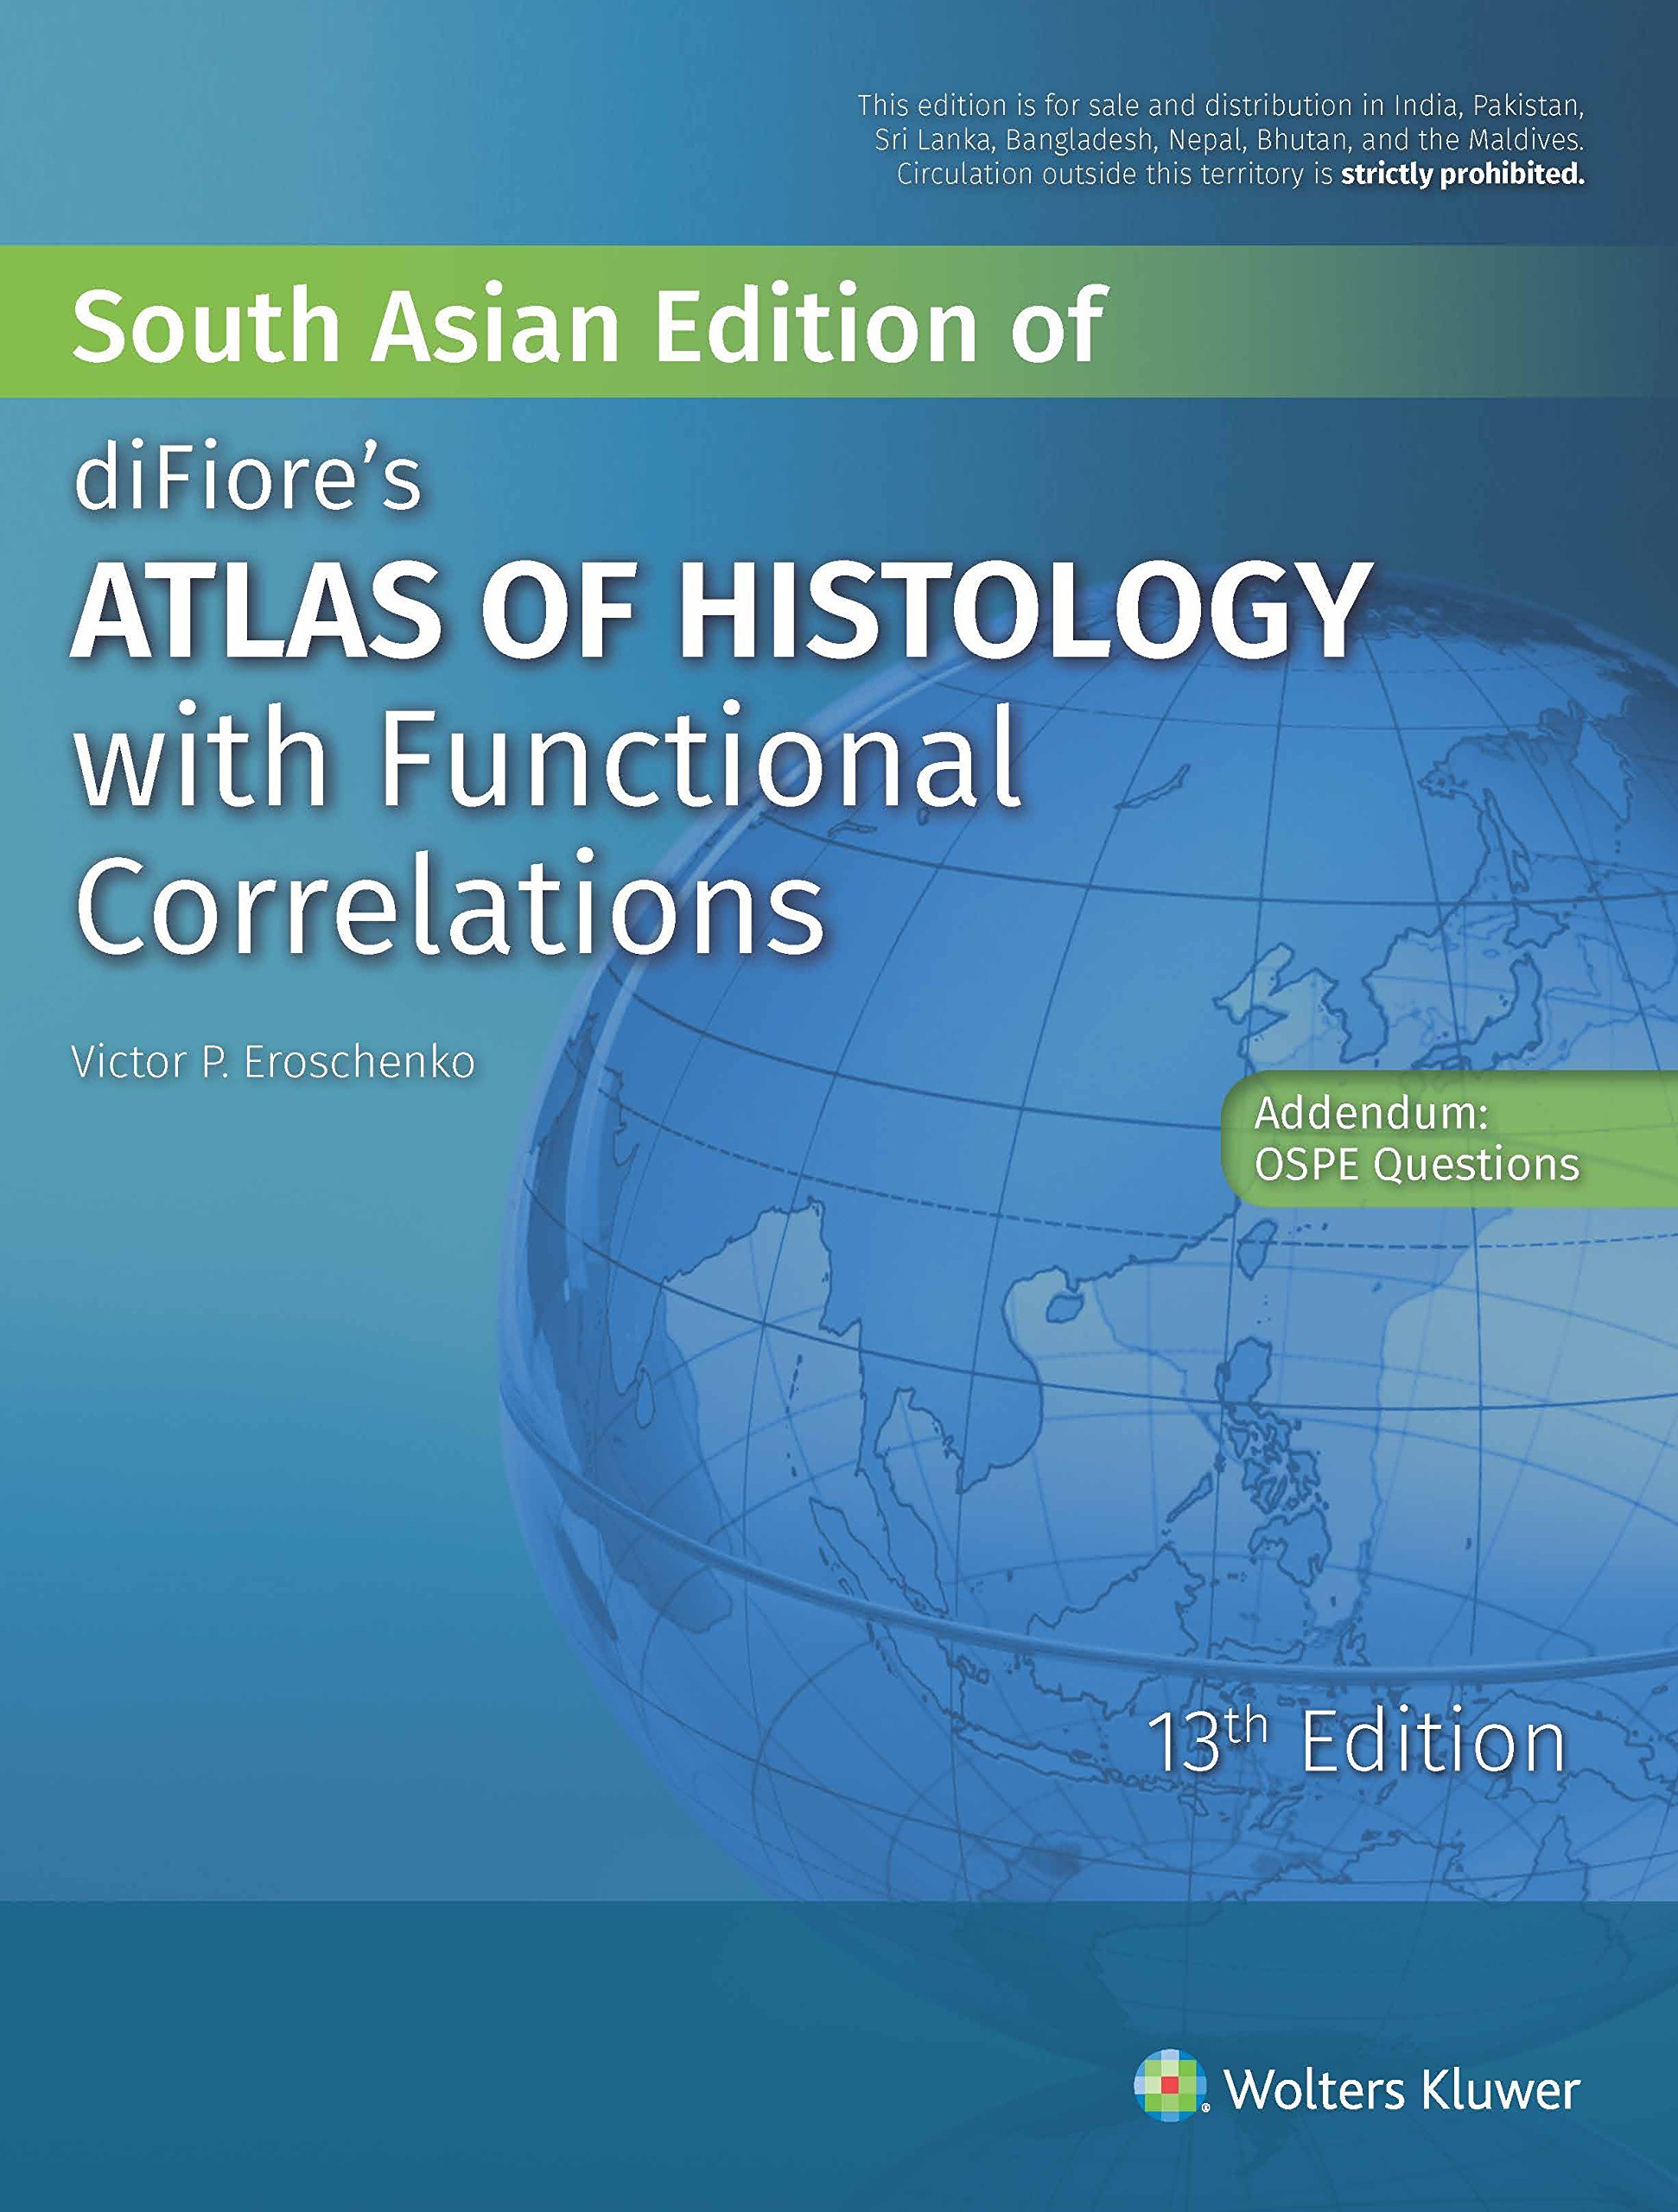 Difioreâ's Atlas of Histology with Functional Correlations, 13th Edition